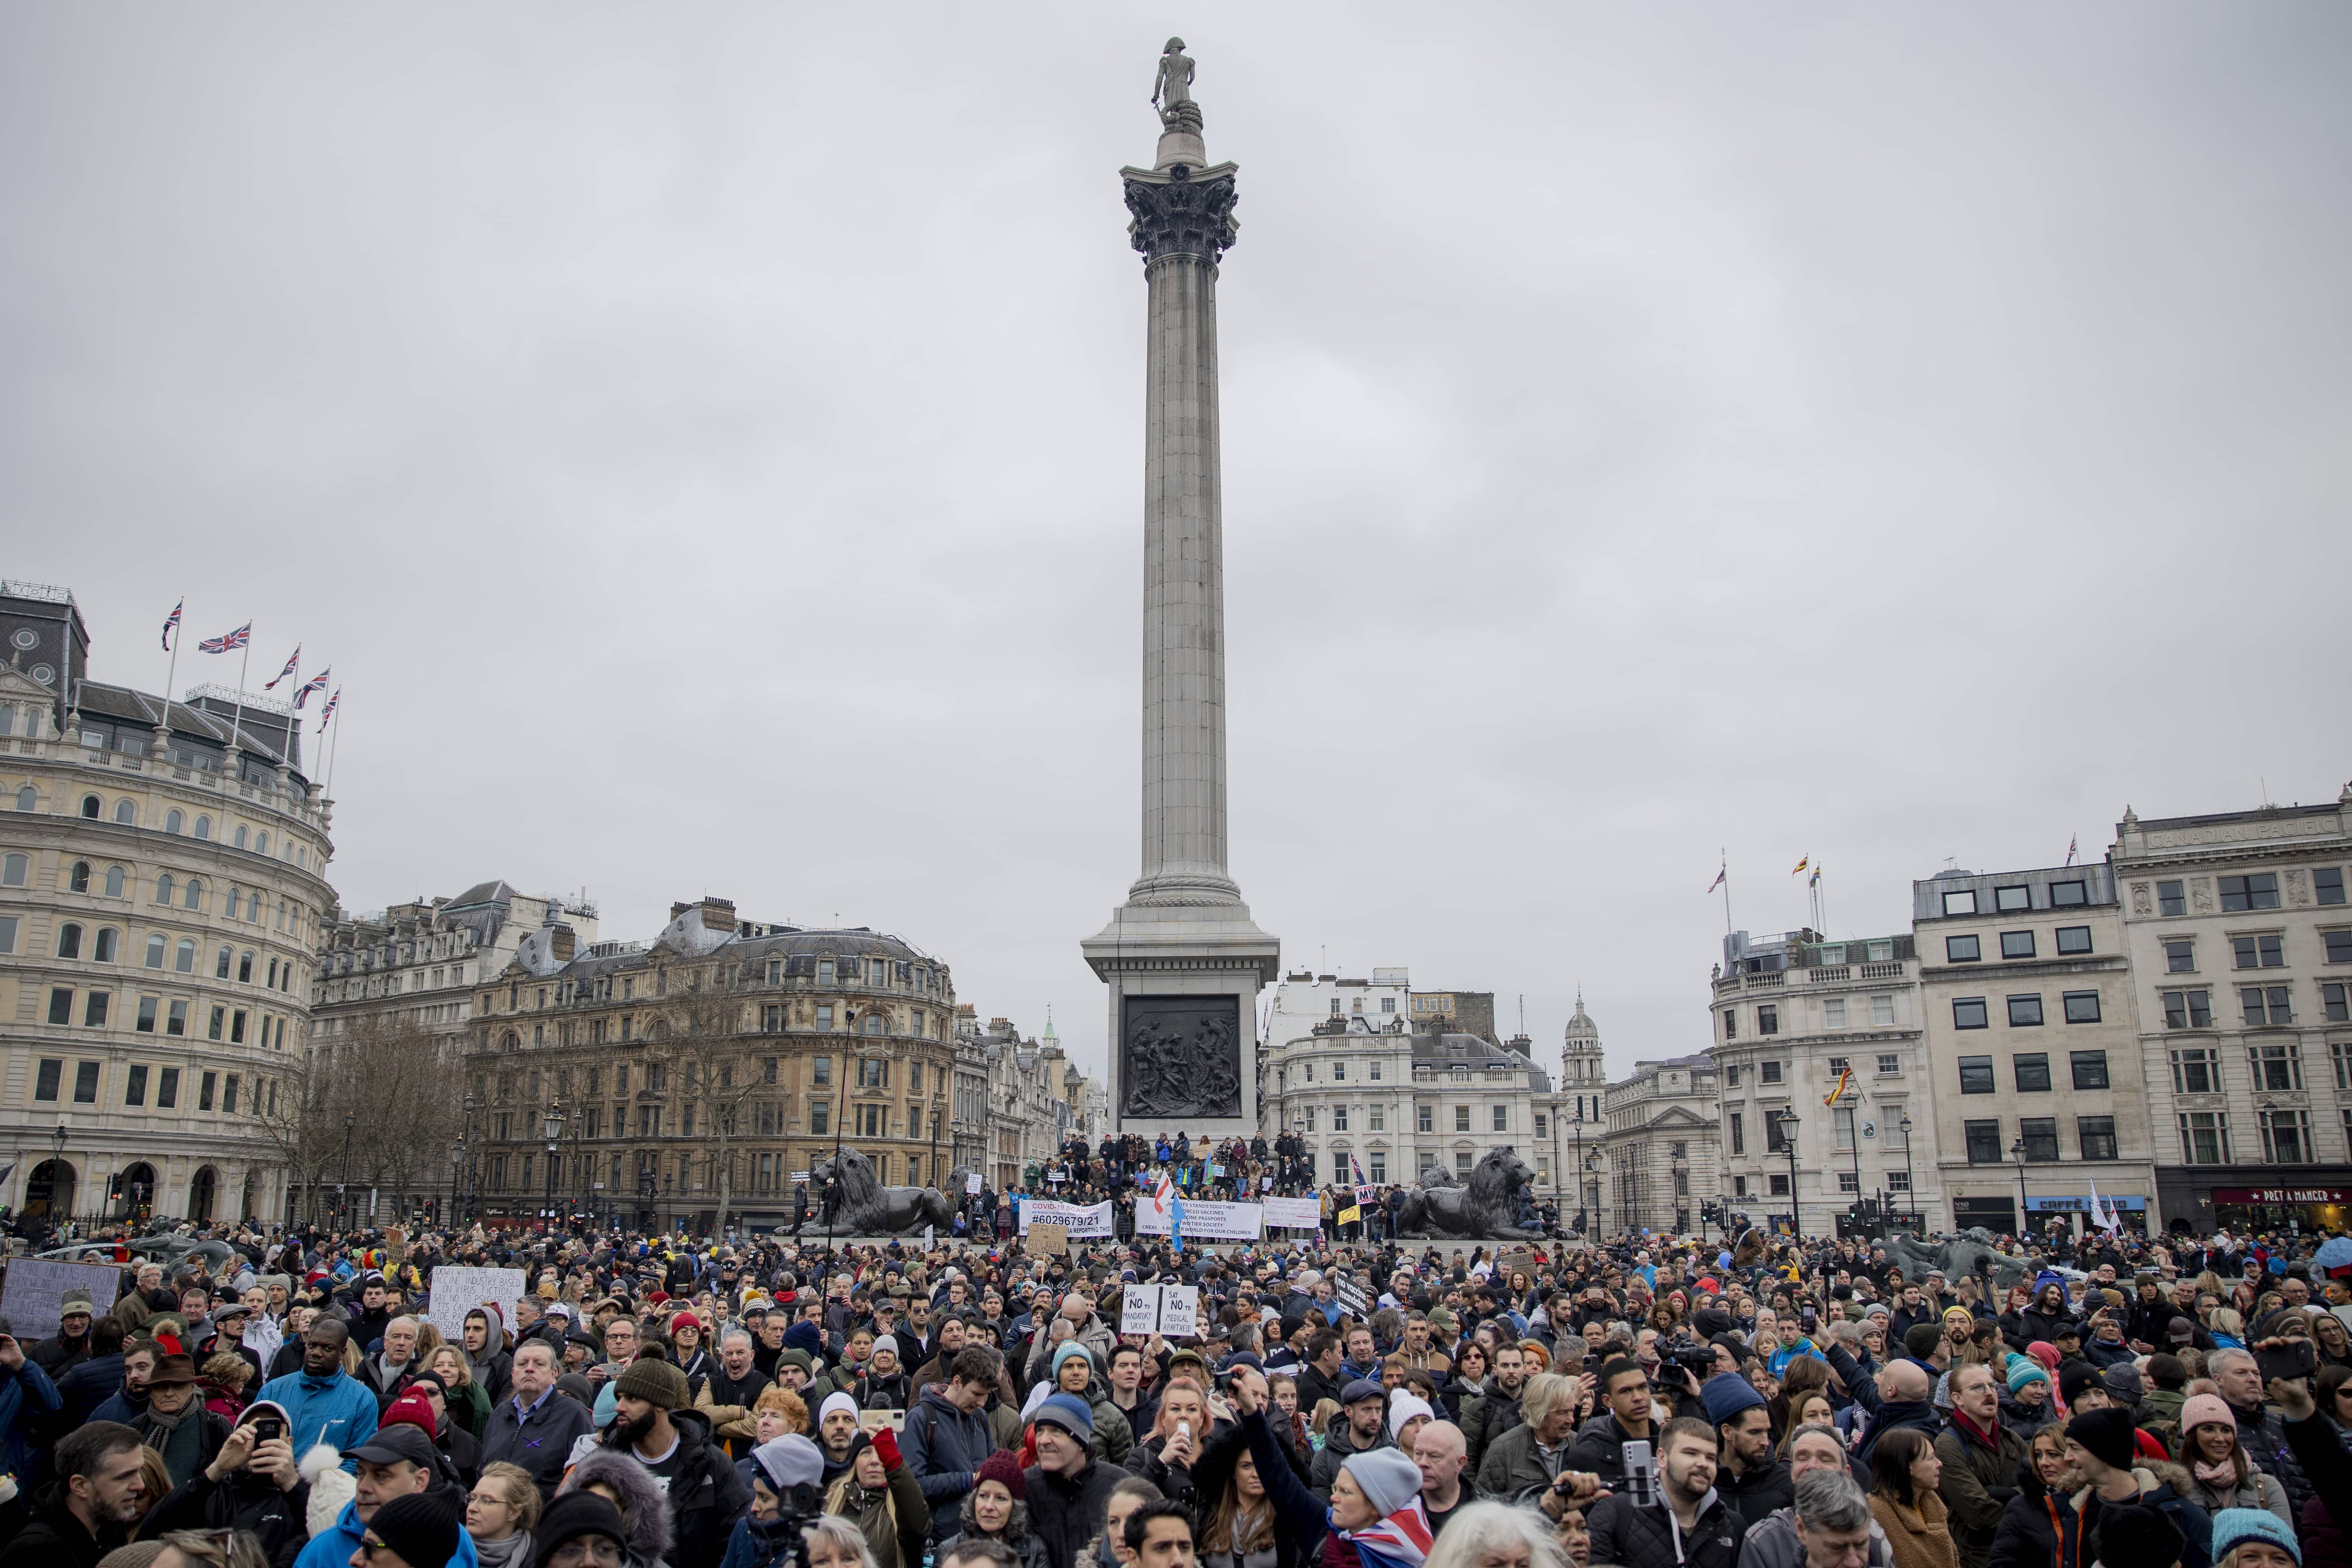 protest-against-mandatory-covid-vaccination-to-all-nhs-staff-in-london-uk-22-jan-2022